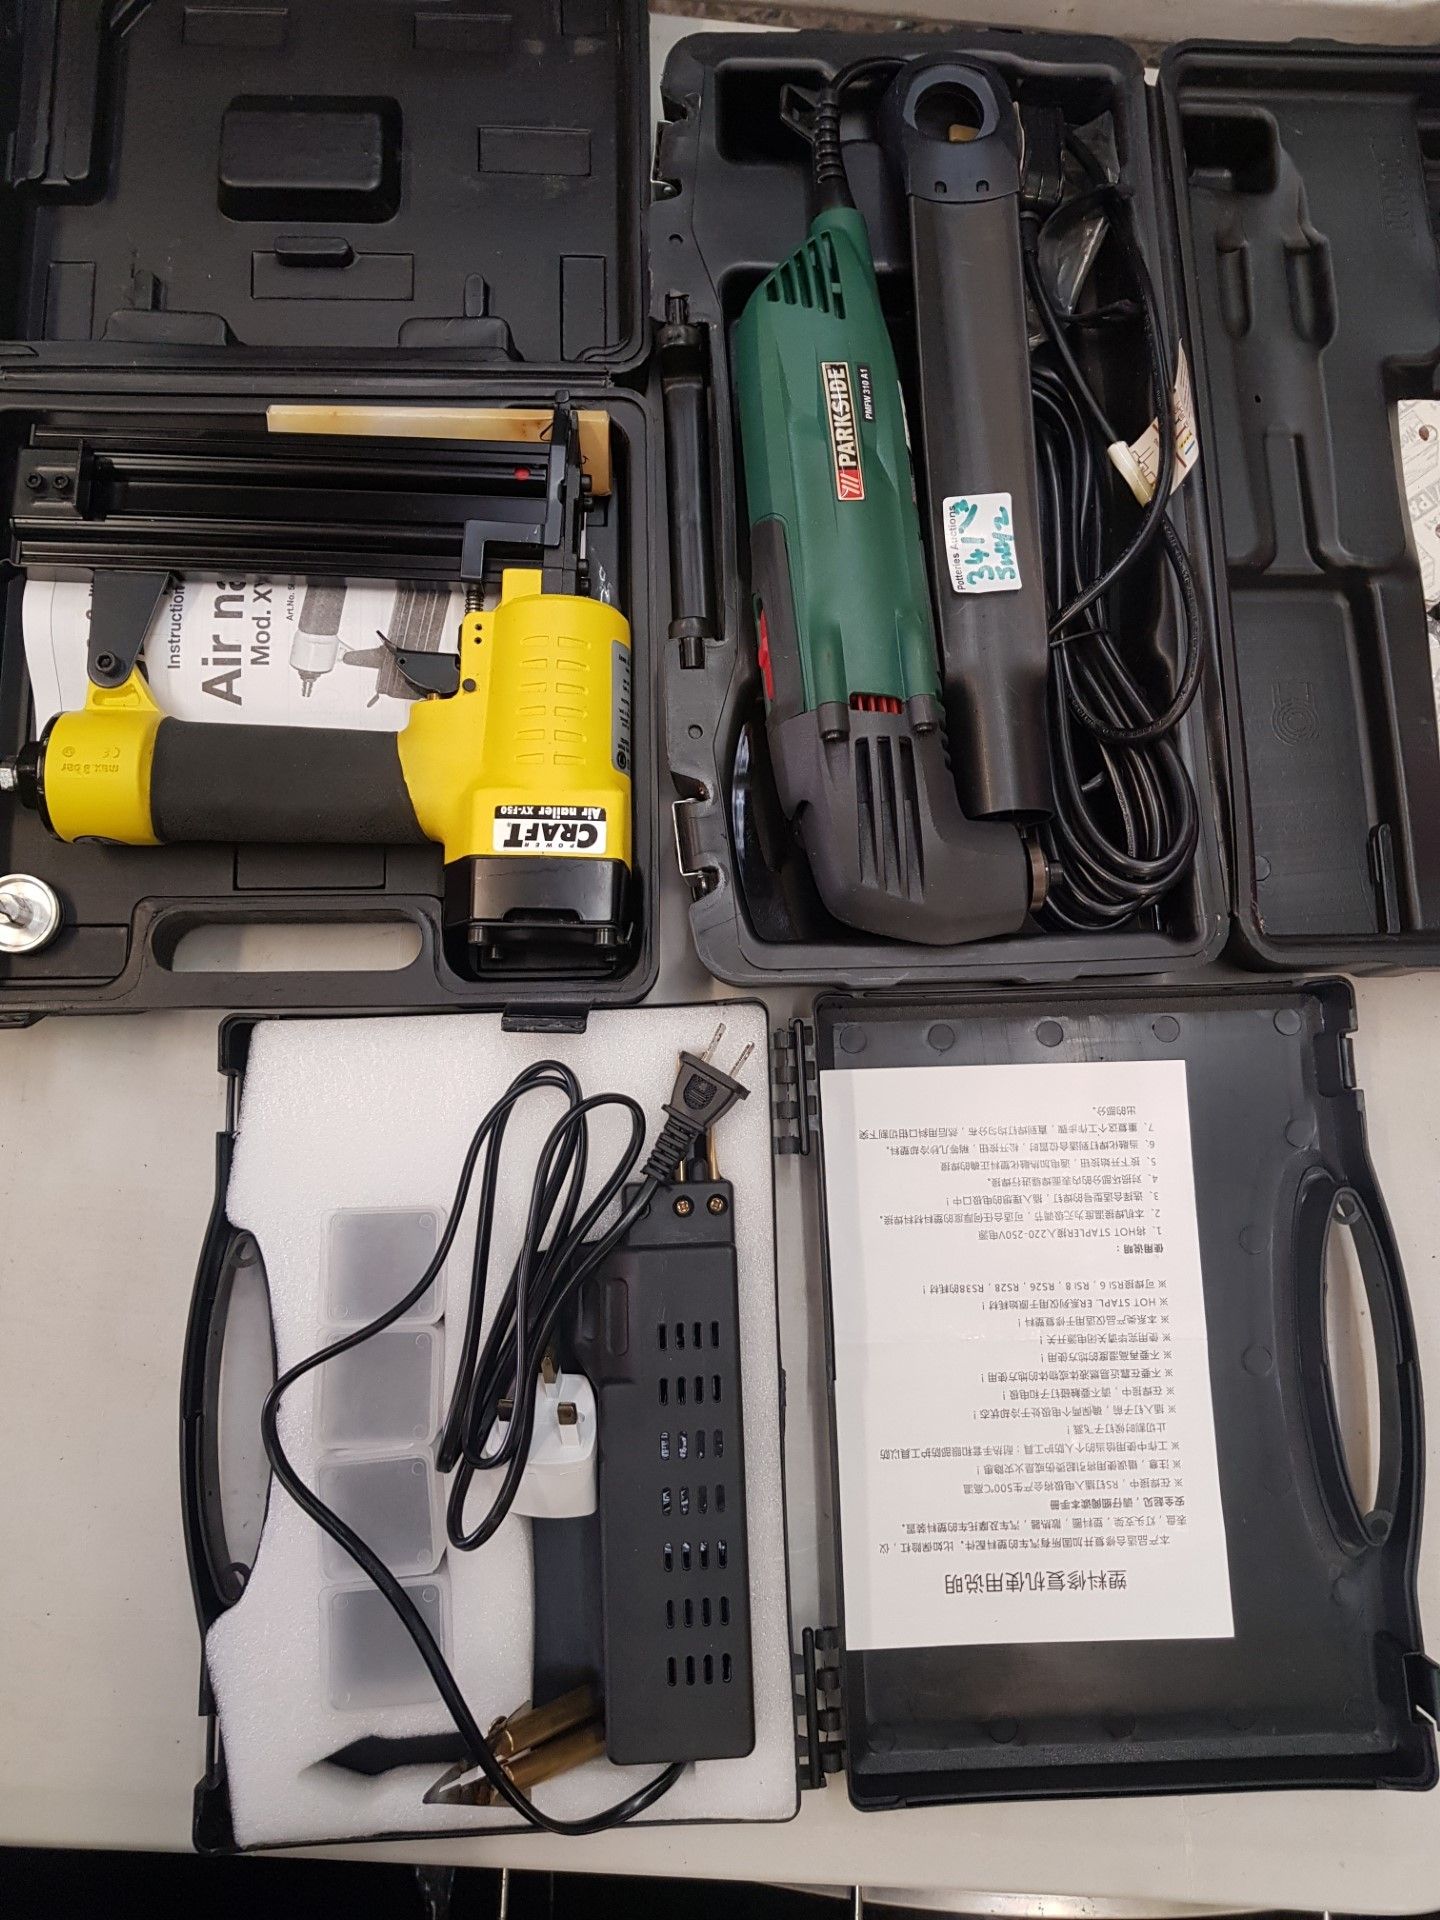 Cased Powecraft Air Nailer Model XYF50 Together With Parkside PMFW 310 A1 Cased Multi Tool & a Cased